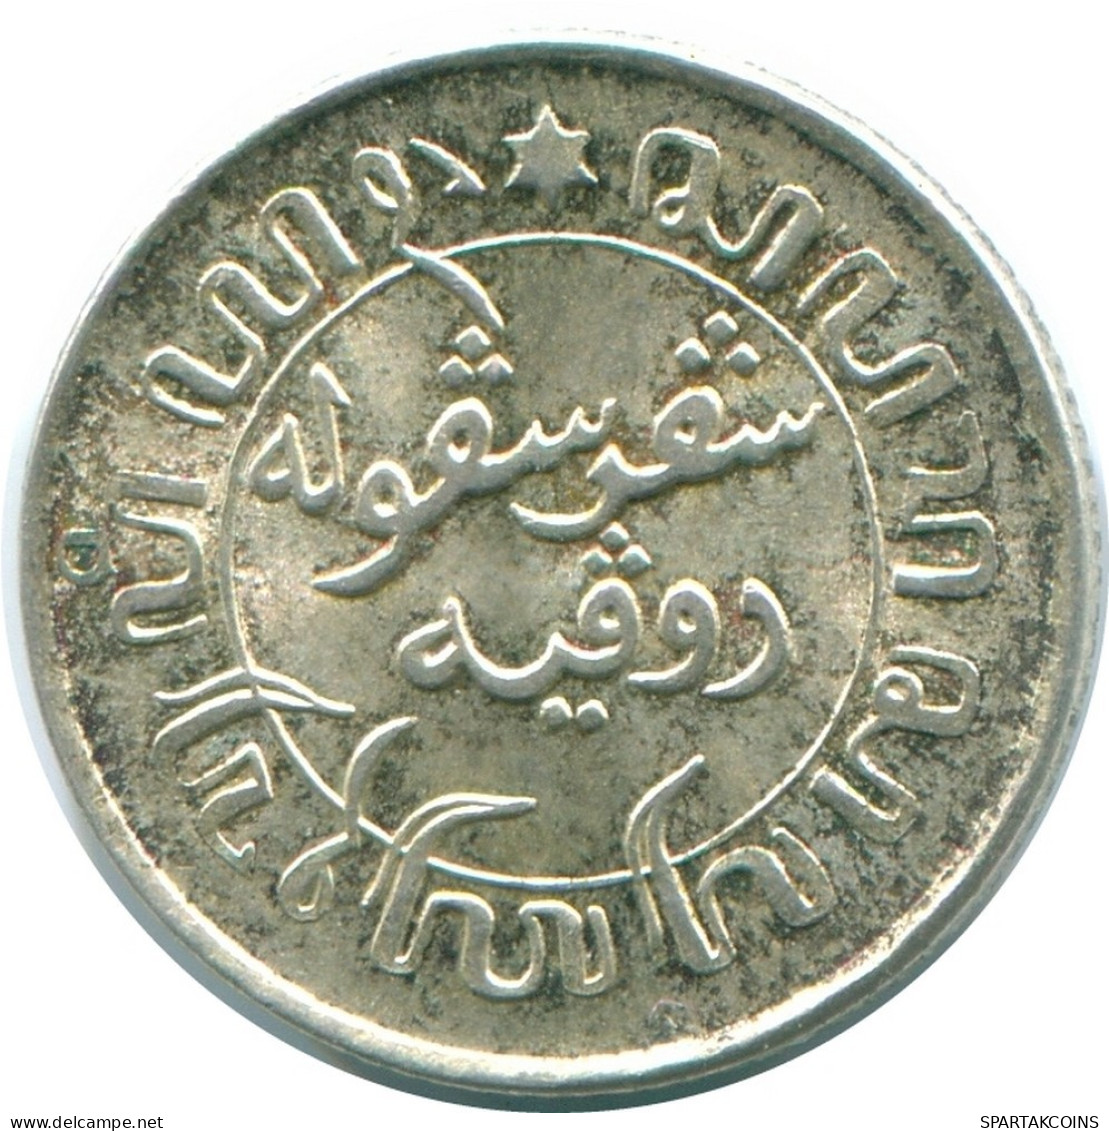 1/10 GULDEN 1945 S NETHERLANDS EAST INDIES SILVER Colonial Coin #NL14184.3.U.A - Dutch East Indies